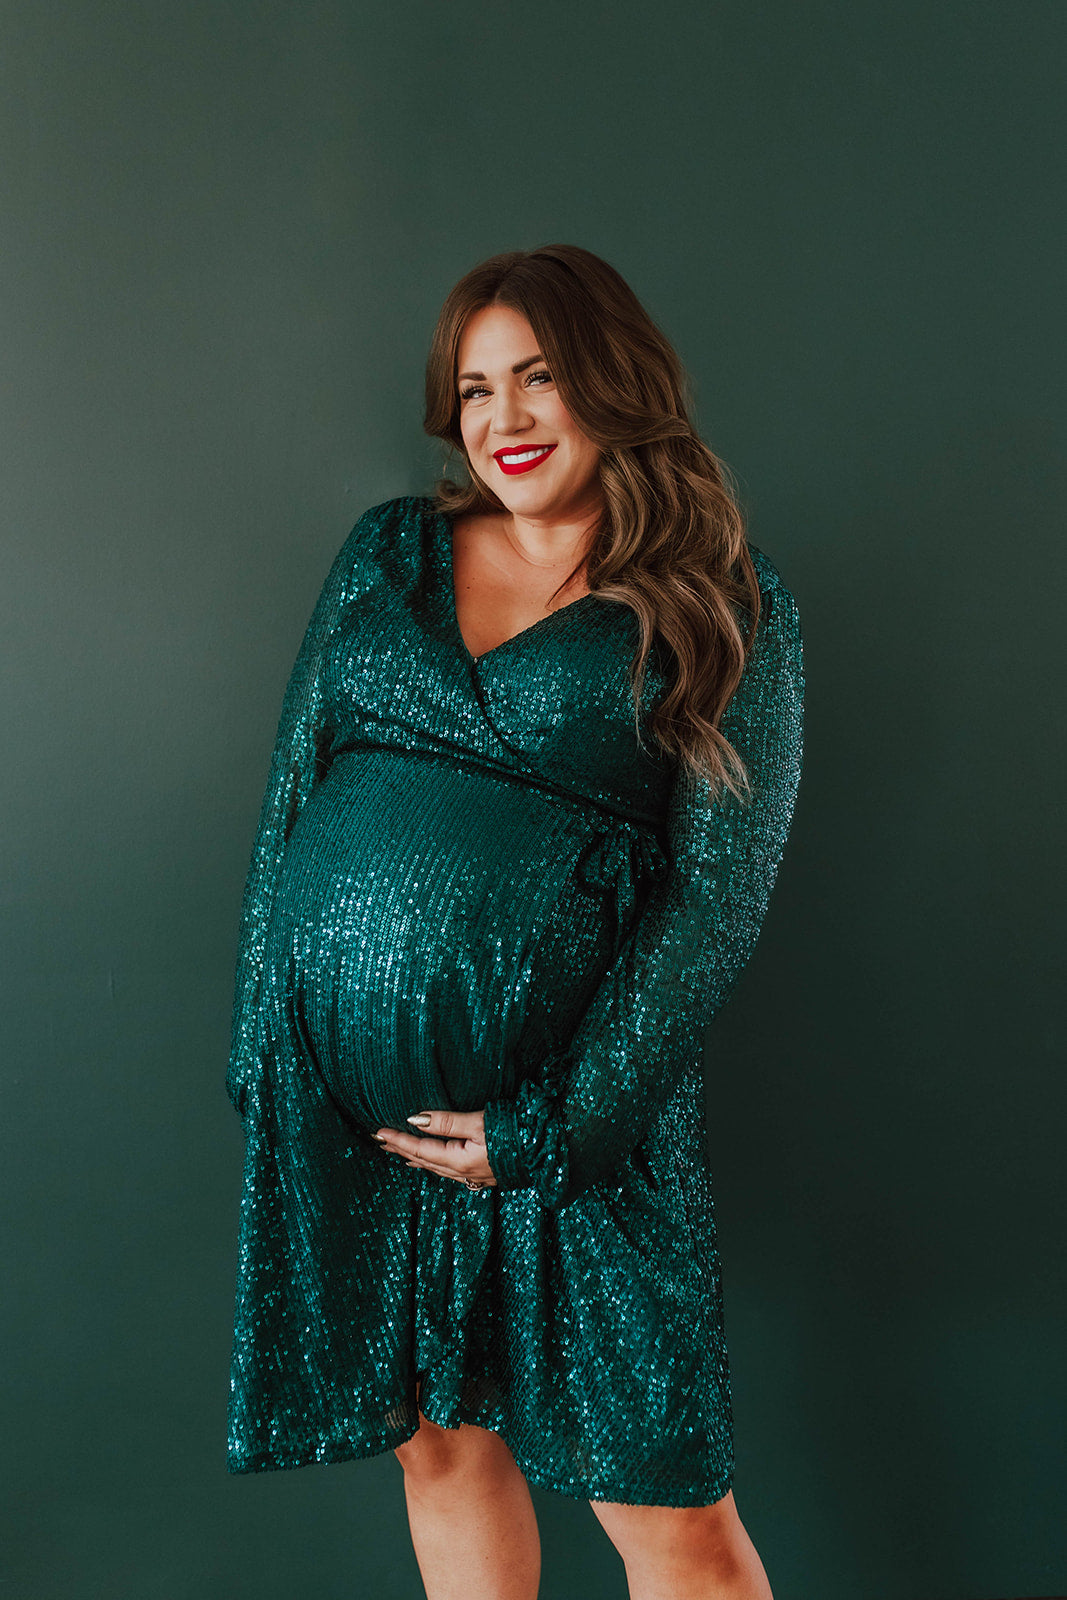 THE SPARKLY SEQUIN WRAP DRESS IN HUNTER GREEN BY SARAH TRIPP X PINK DESERT